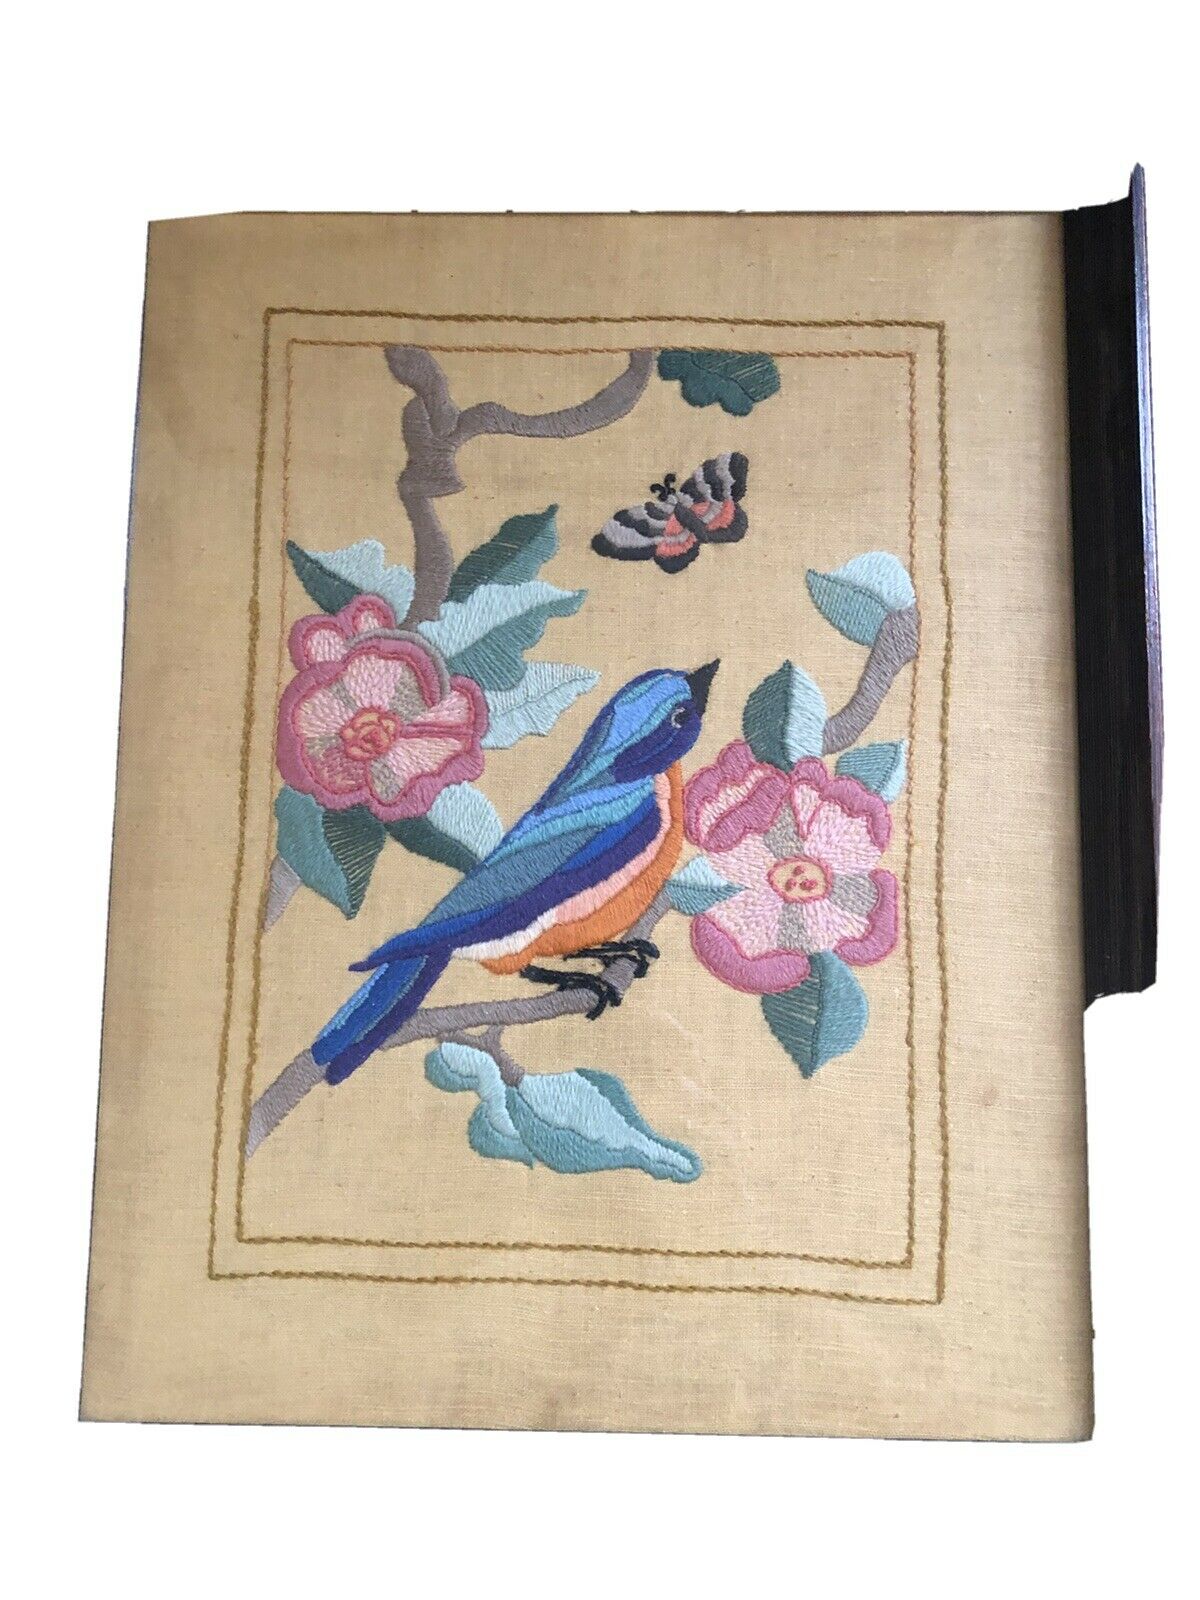 Vintage Bird And Flowers Embroidery. Framed